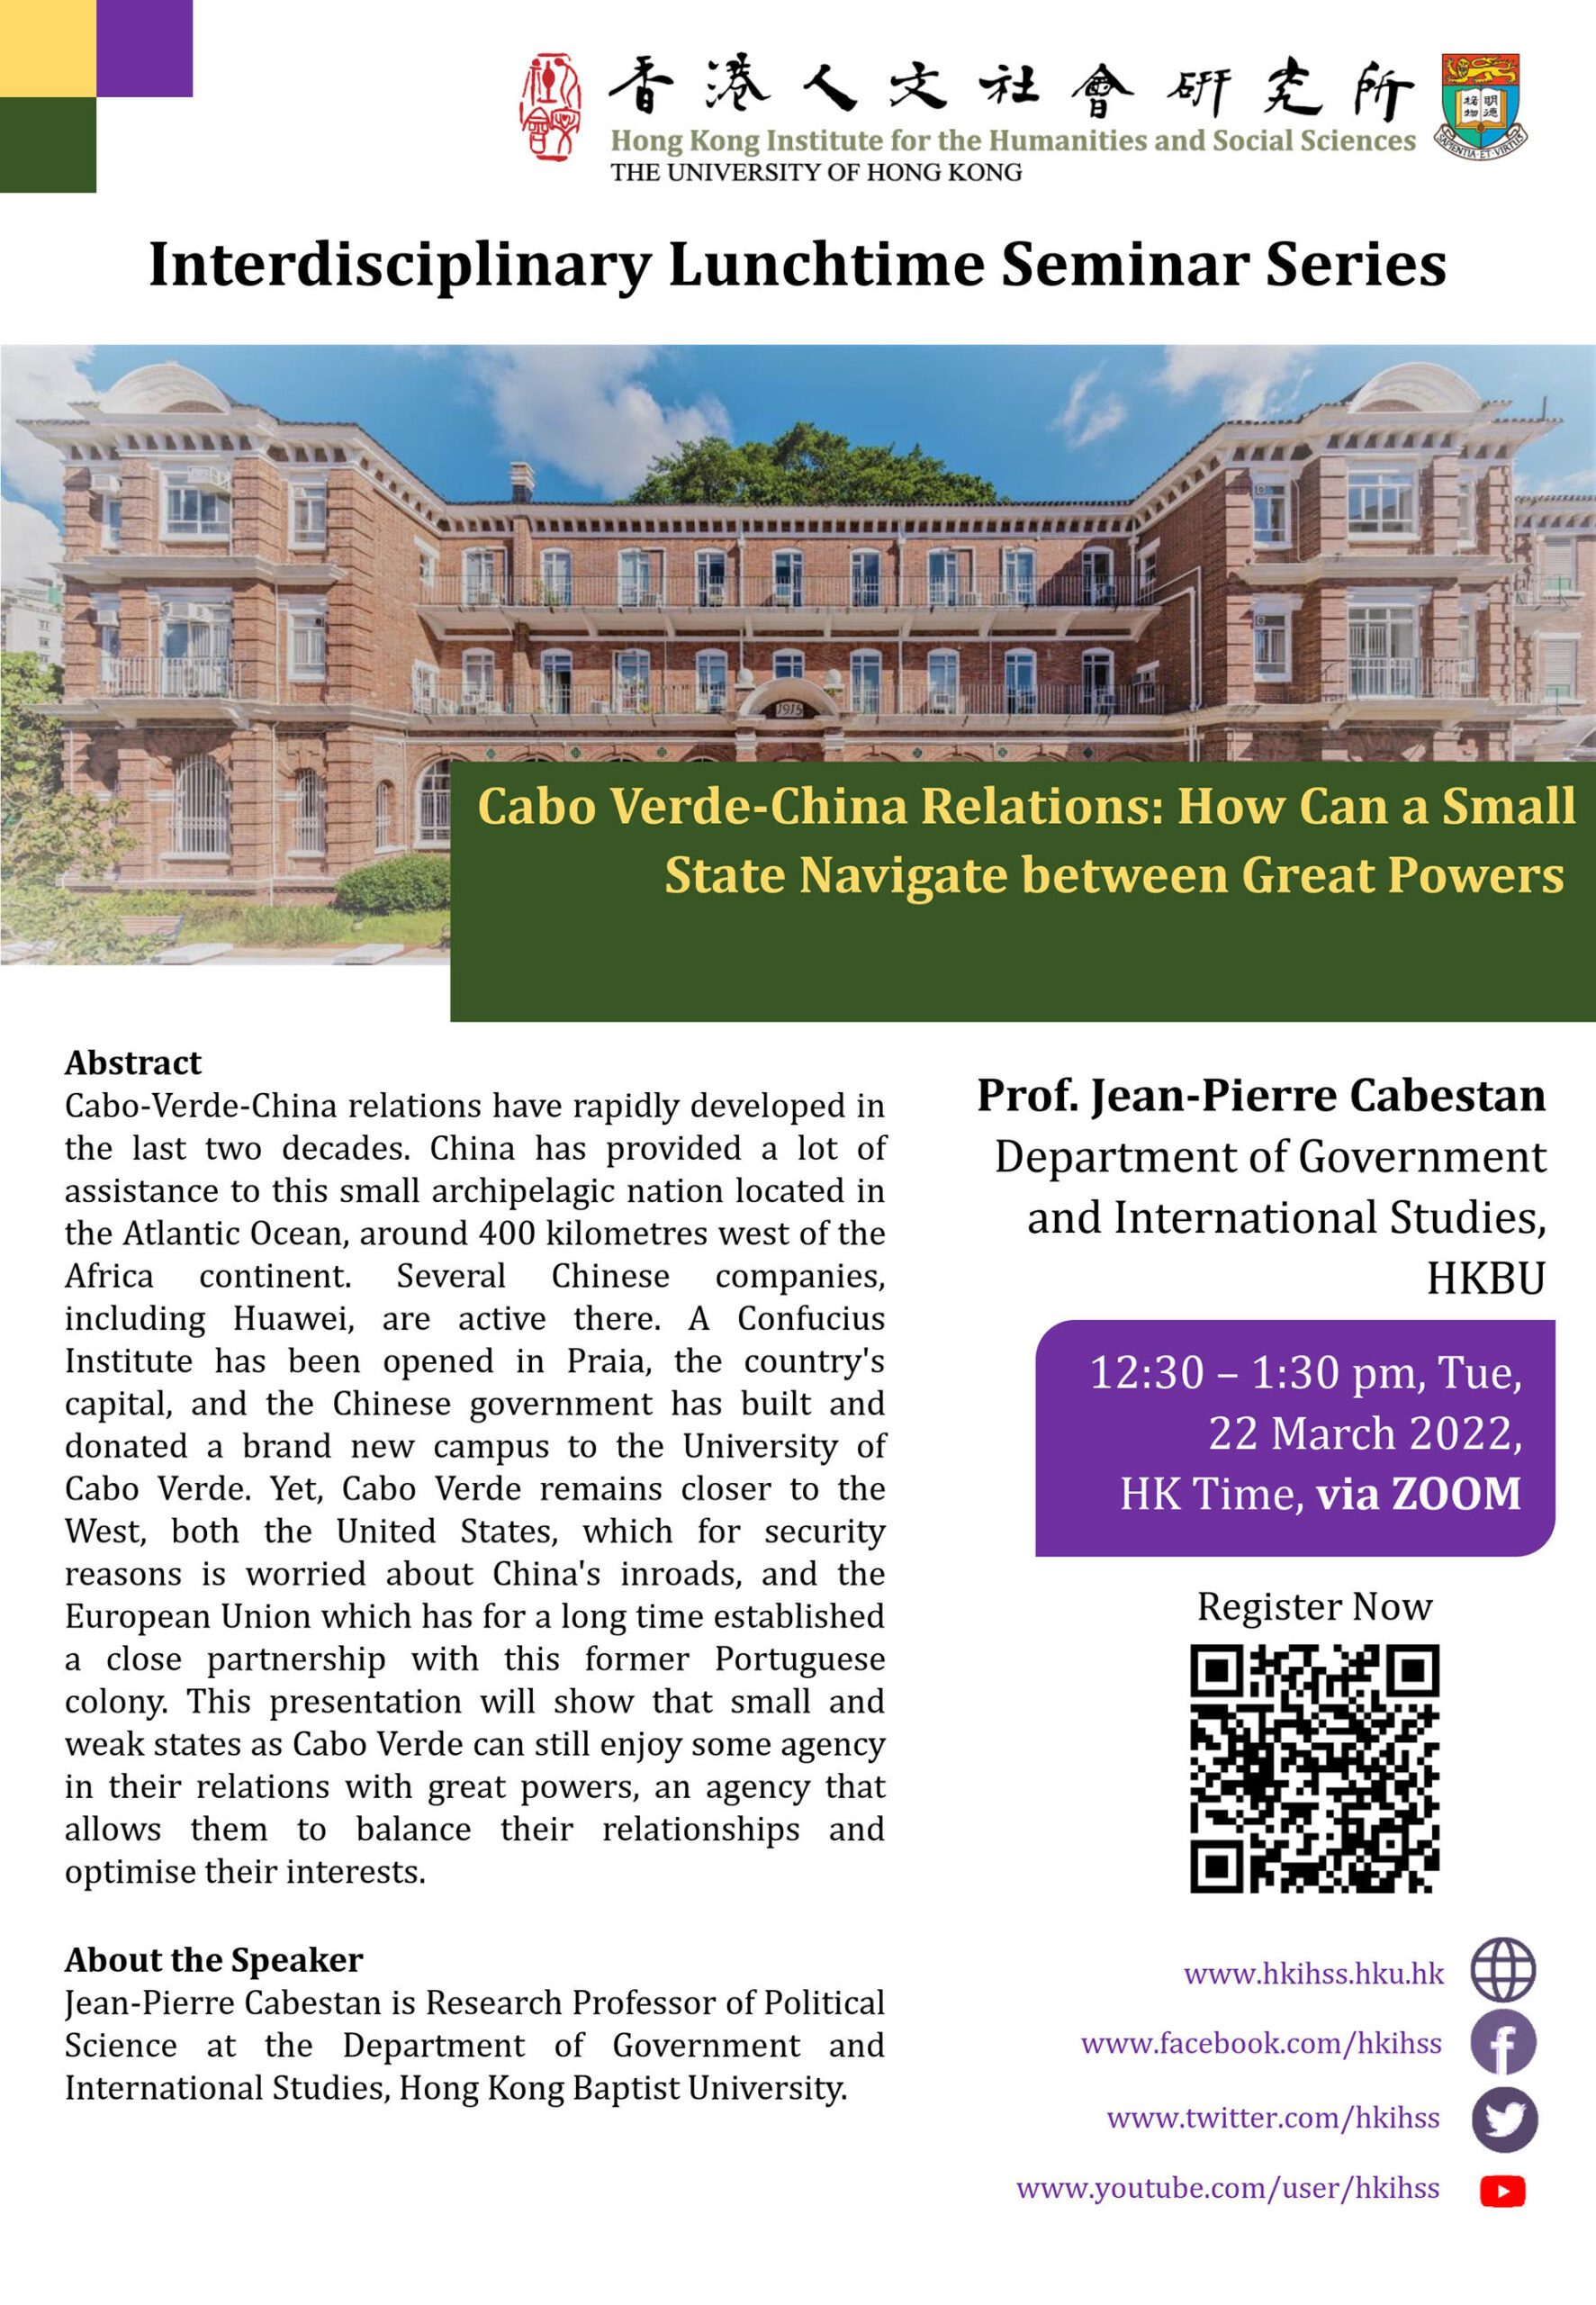 Interdisciplinary Lunchtime Seminar on “Cabo Verde-China Relations: How Can a Small State Navigate between Great Powers” by Professor Jean-Pierre Cabestan (March 22, 2022)